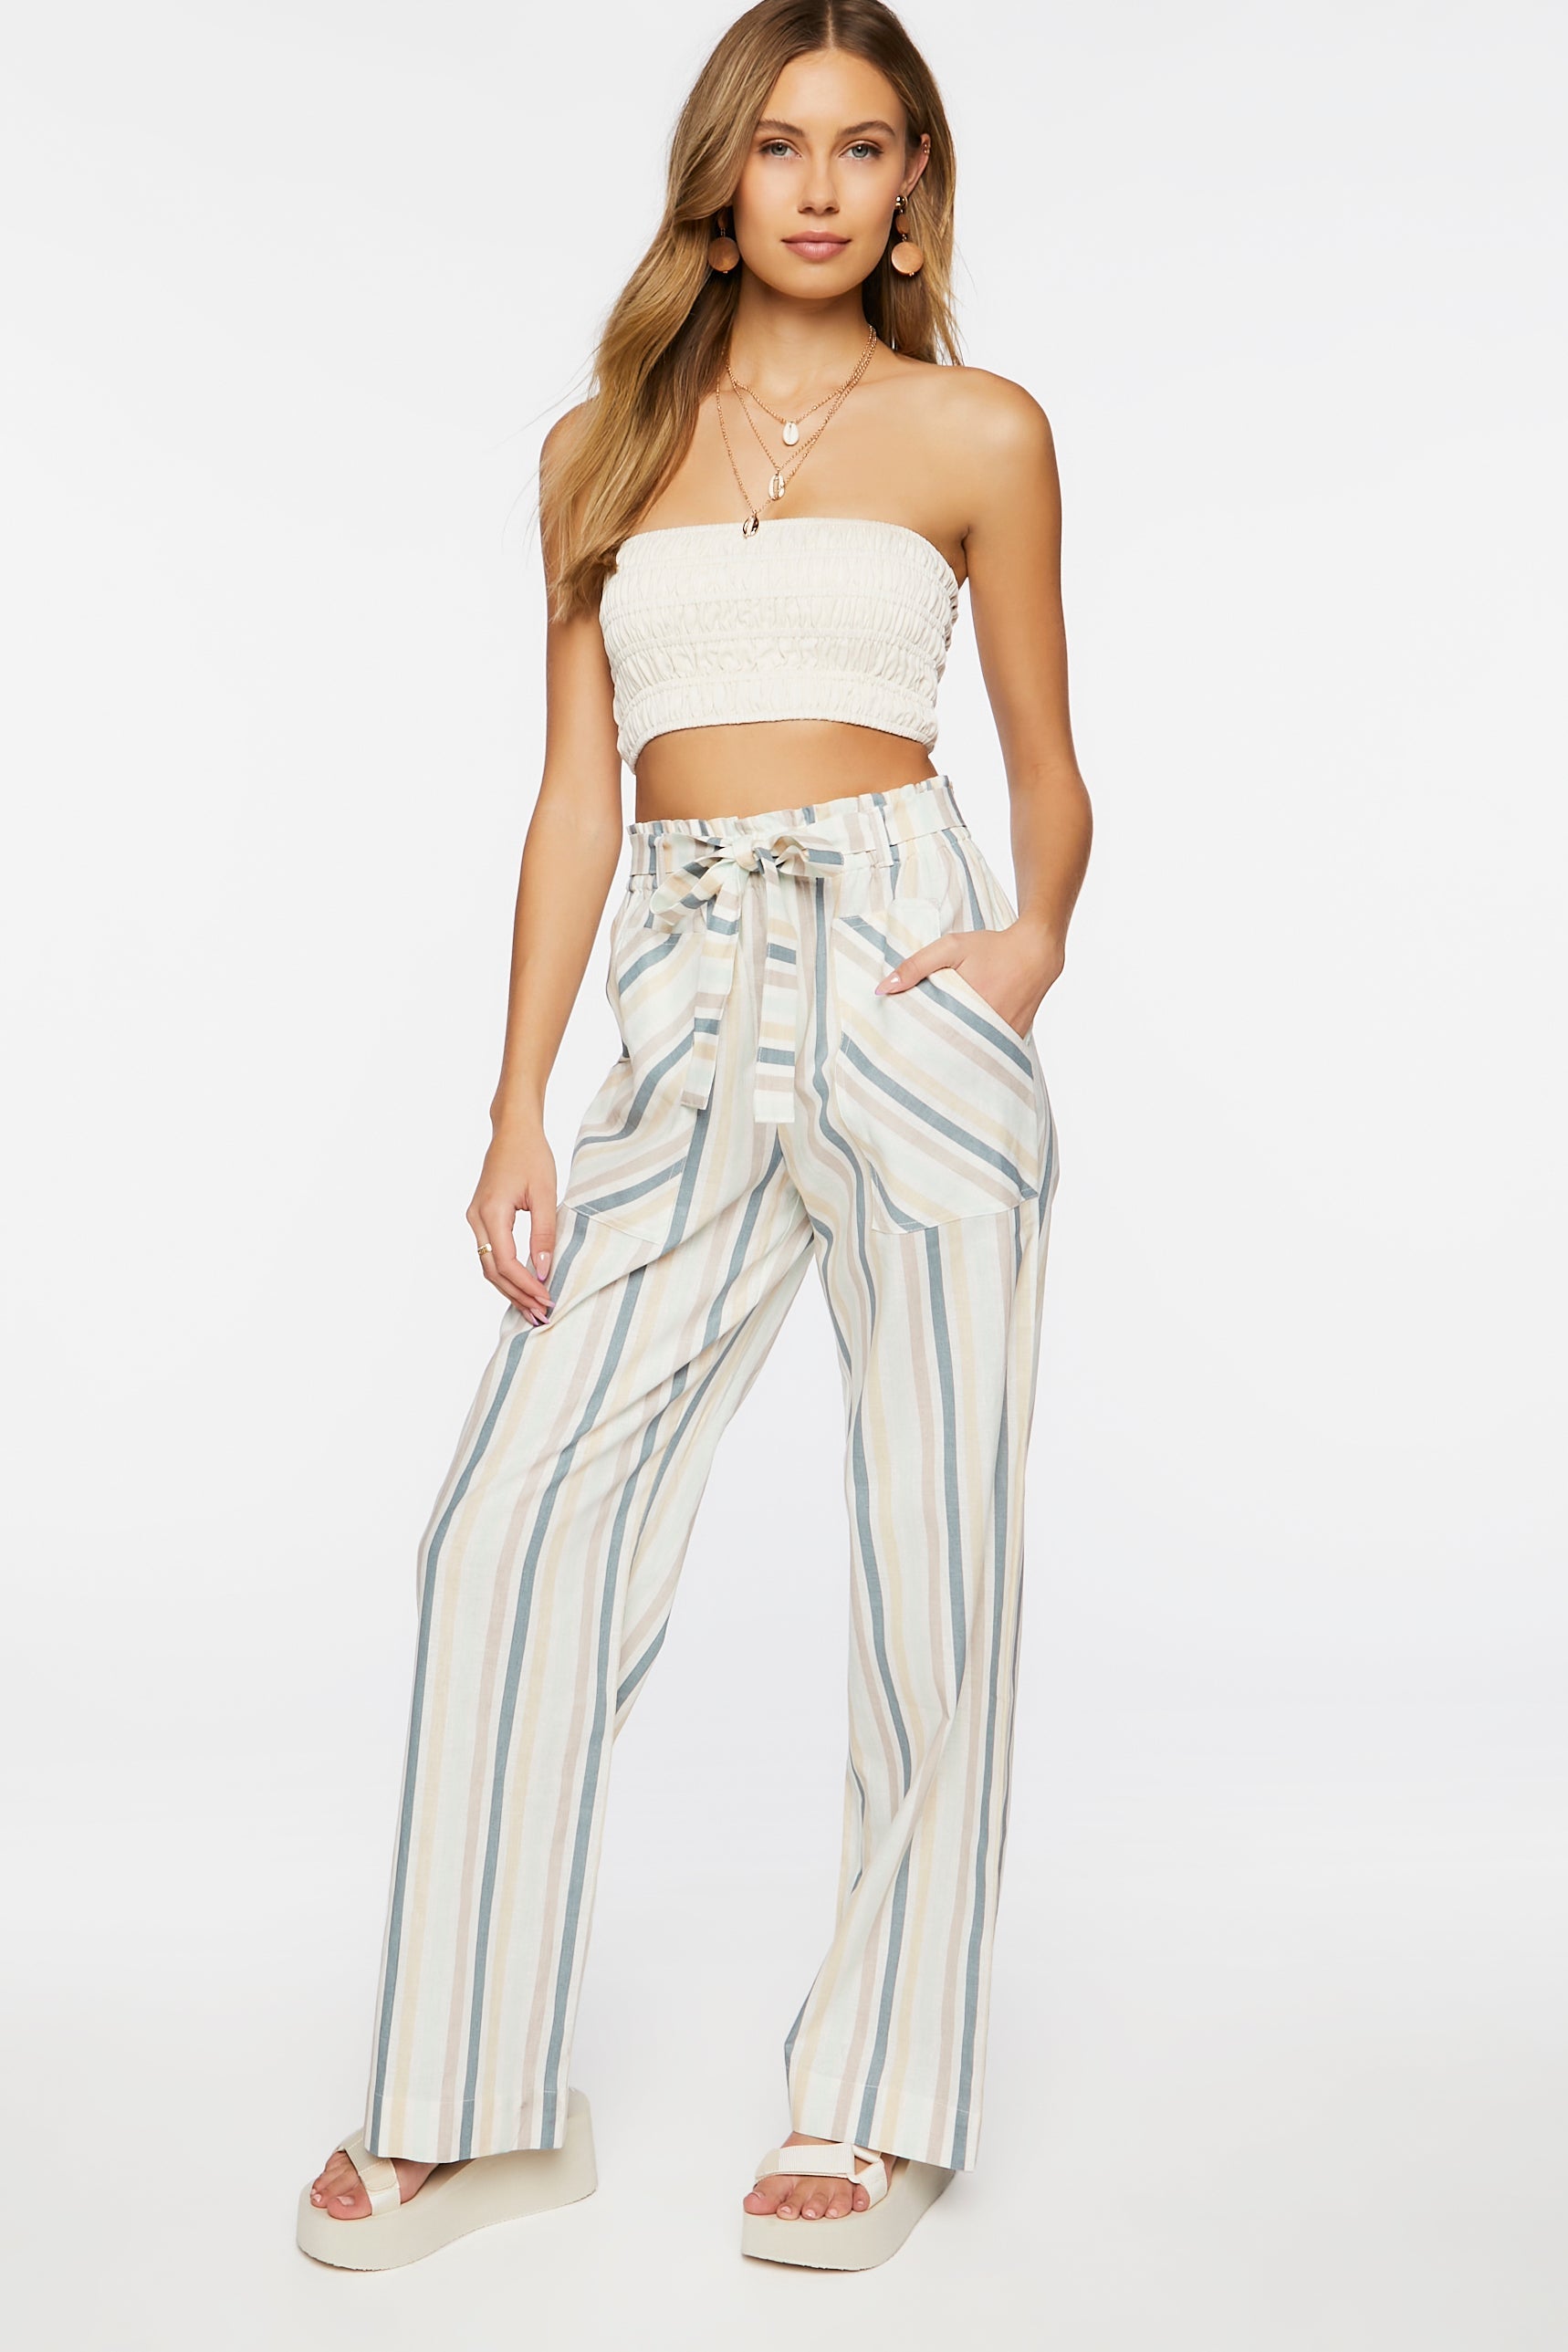 Creammulti Belted Striped Paperbag Pants 